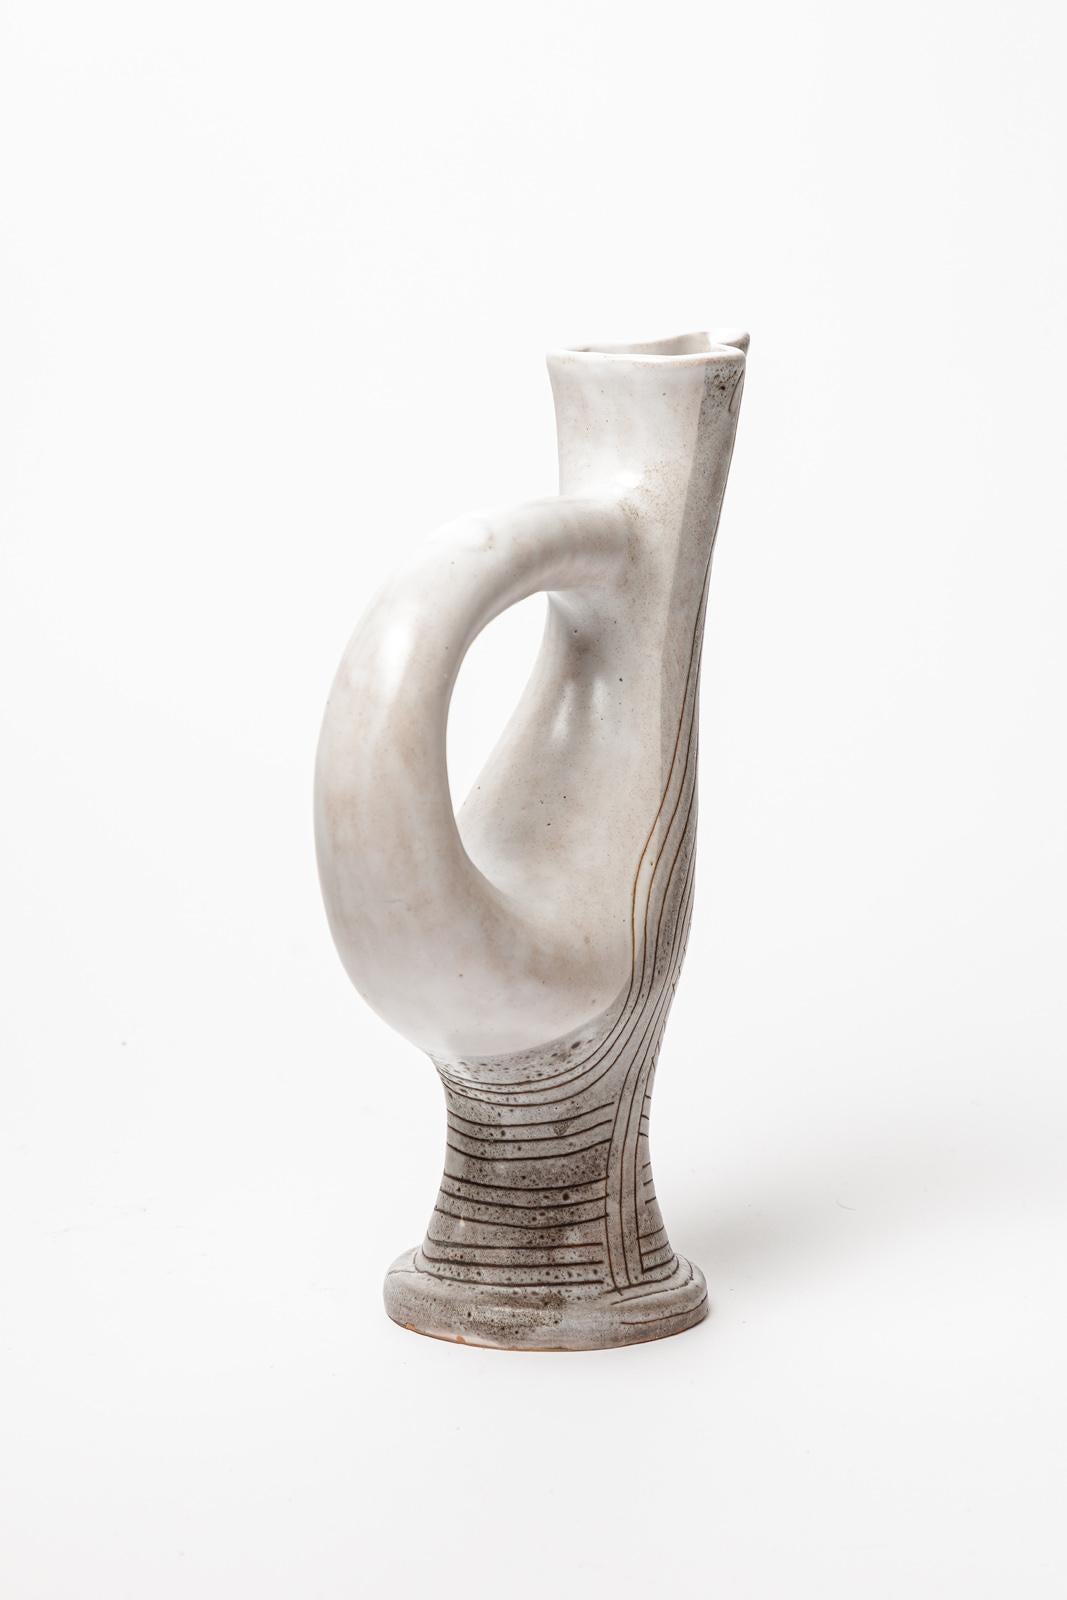 French Jean Austruy Large White and Grey Free Form Ceramic Pitcher, circa 1960 For Sale